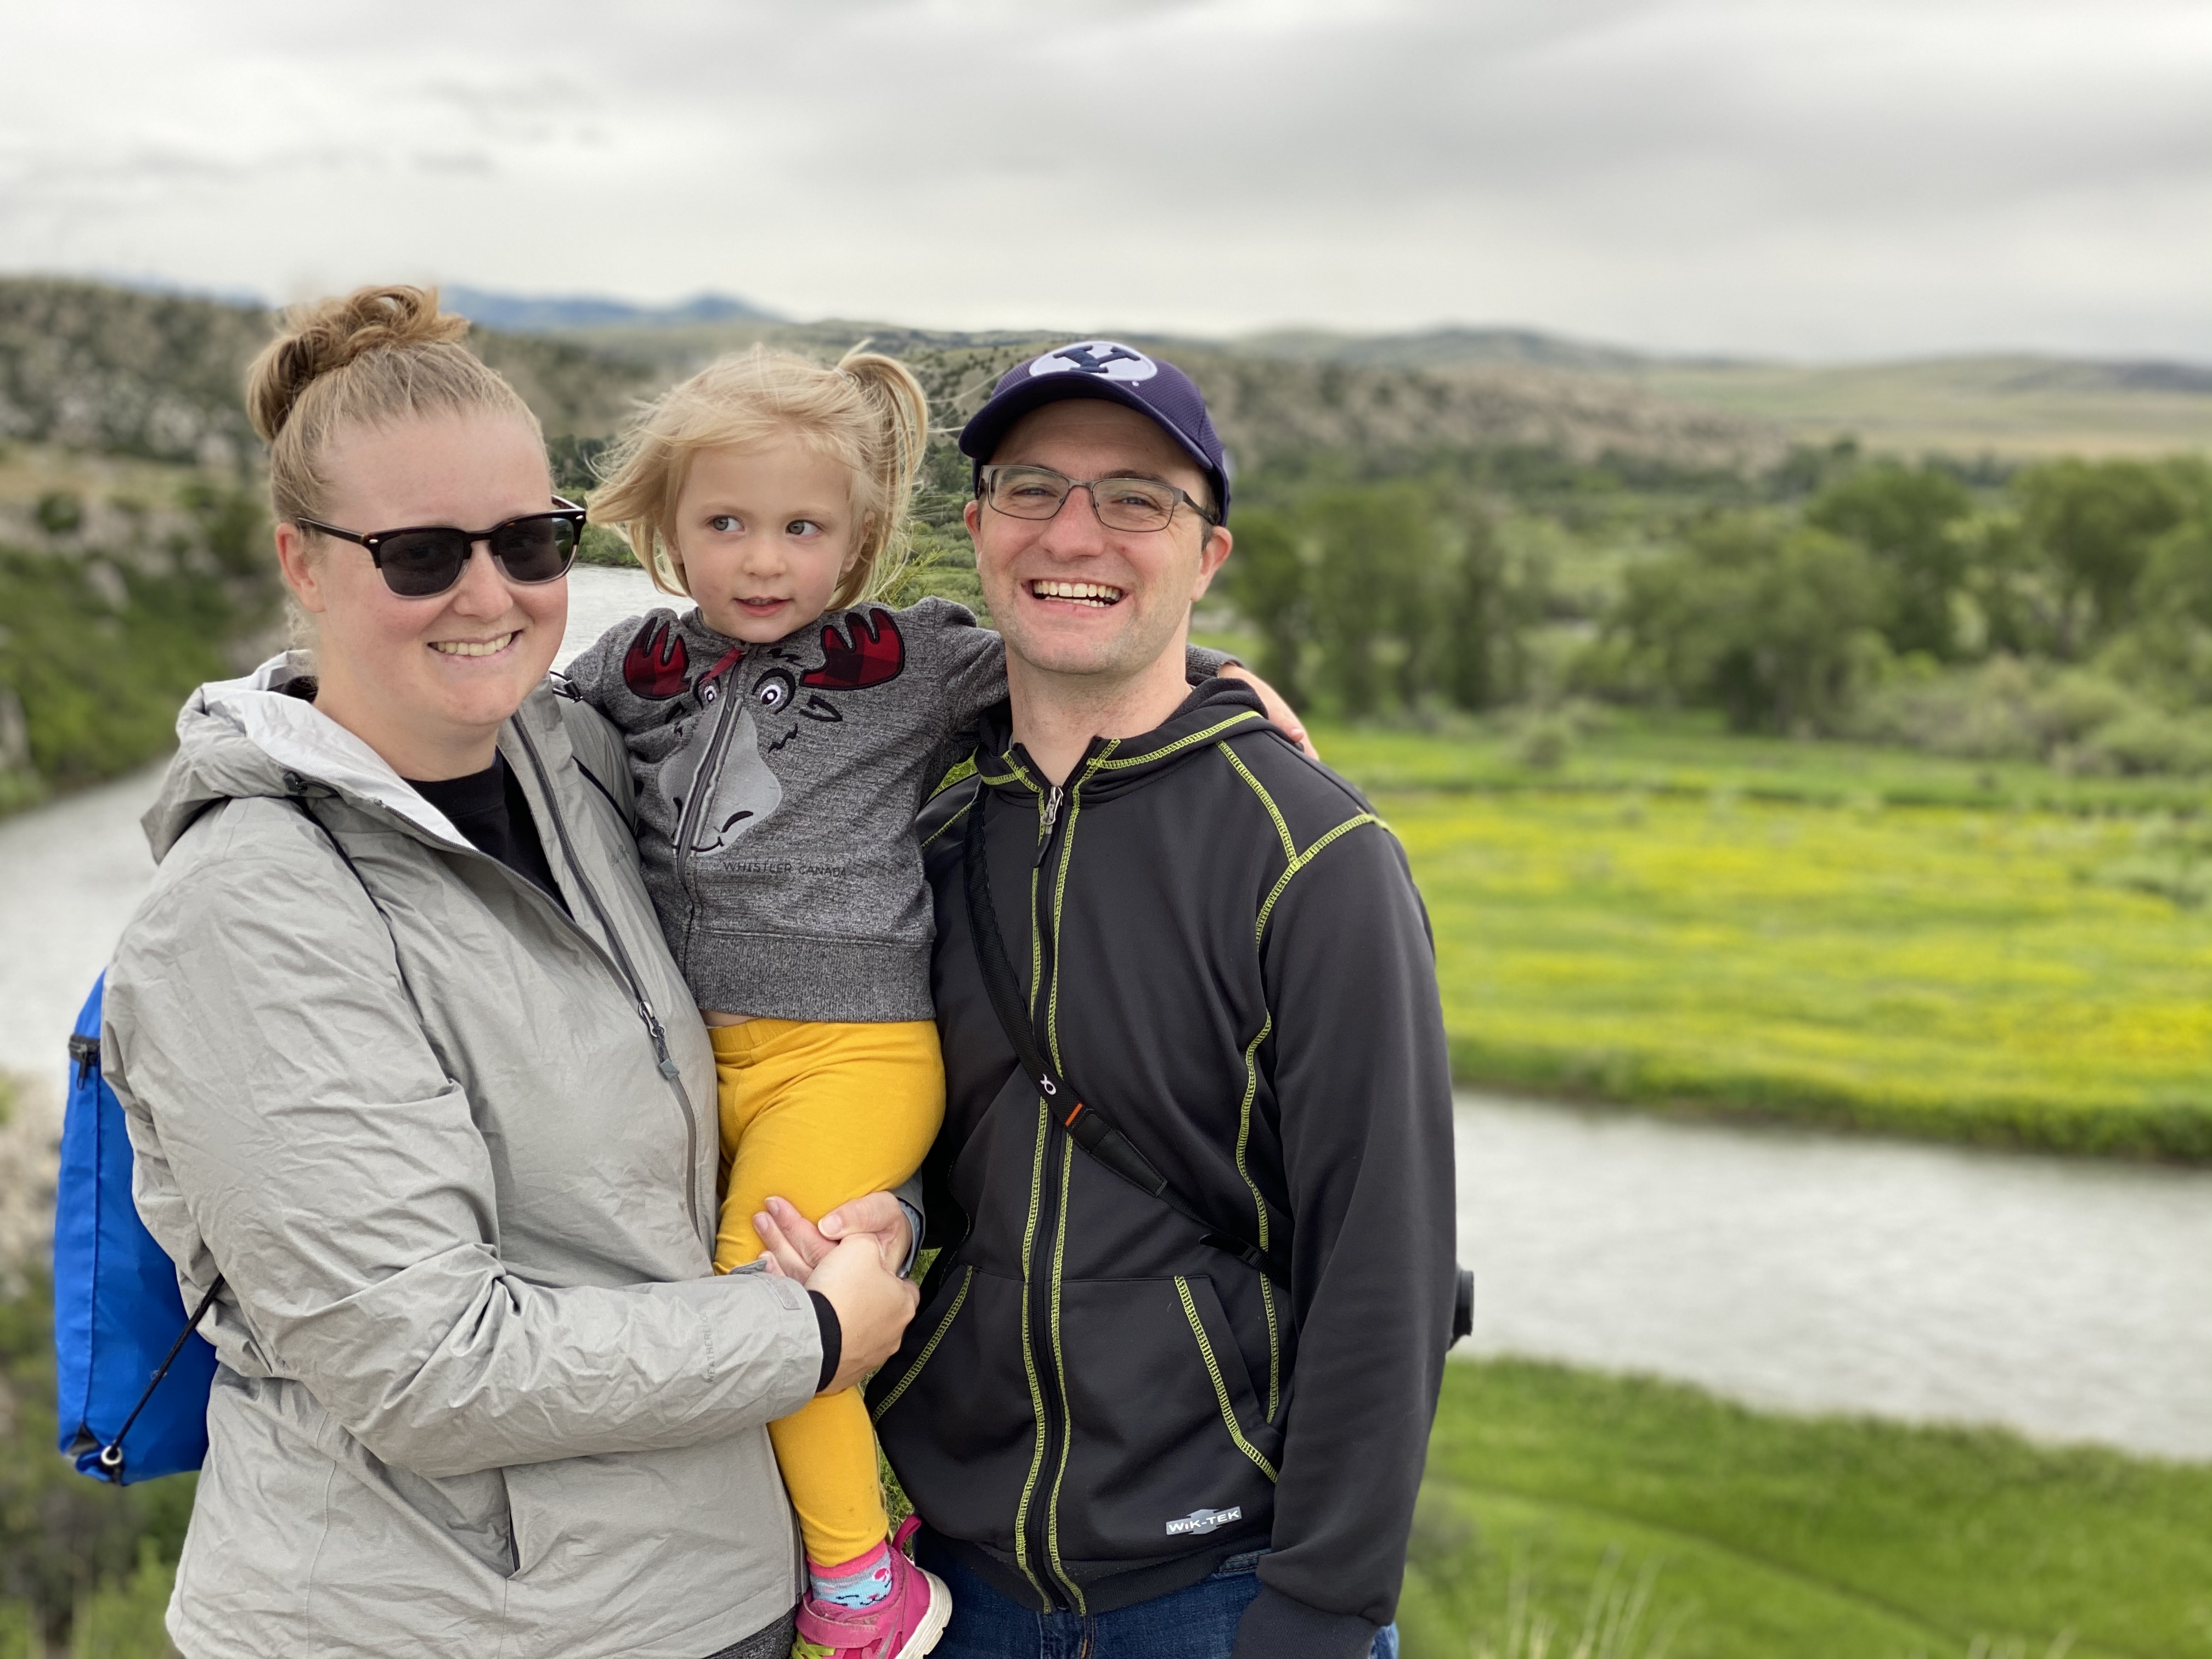 Family at Missouri Headwaters State Park